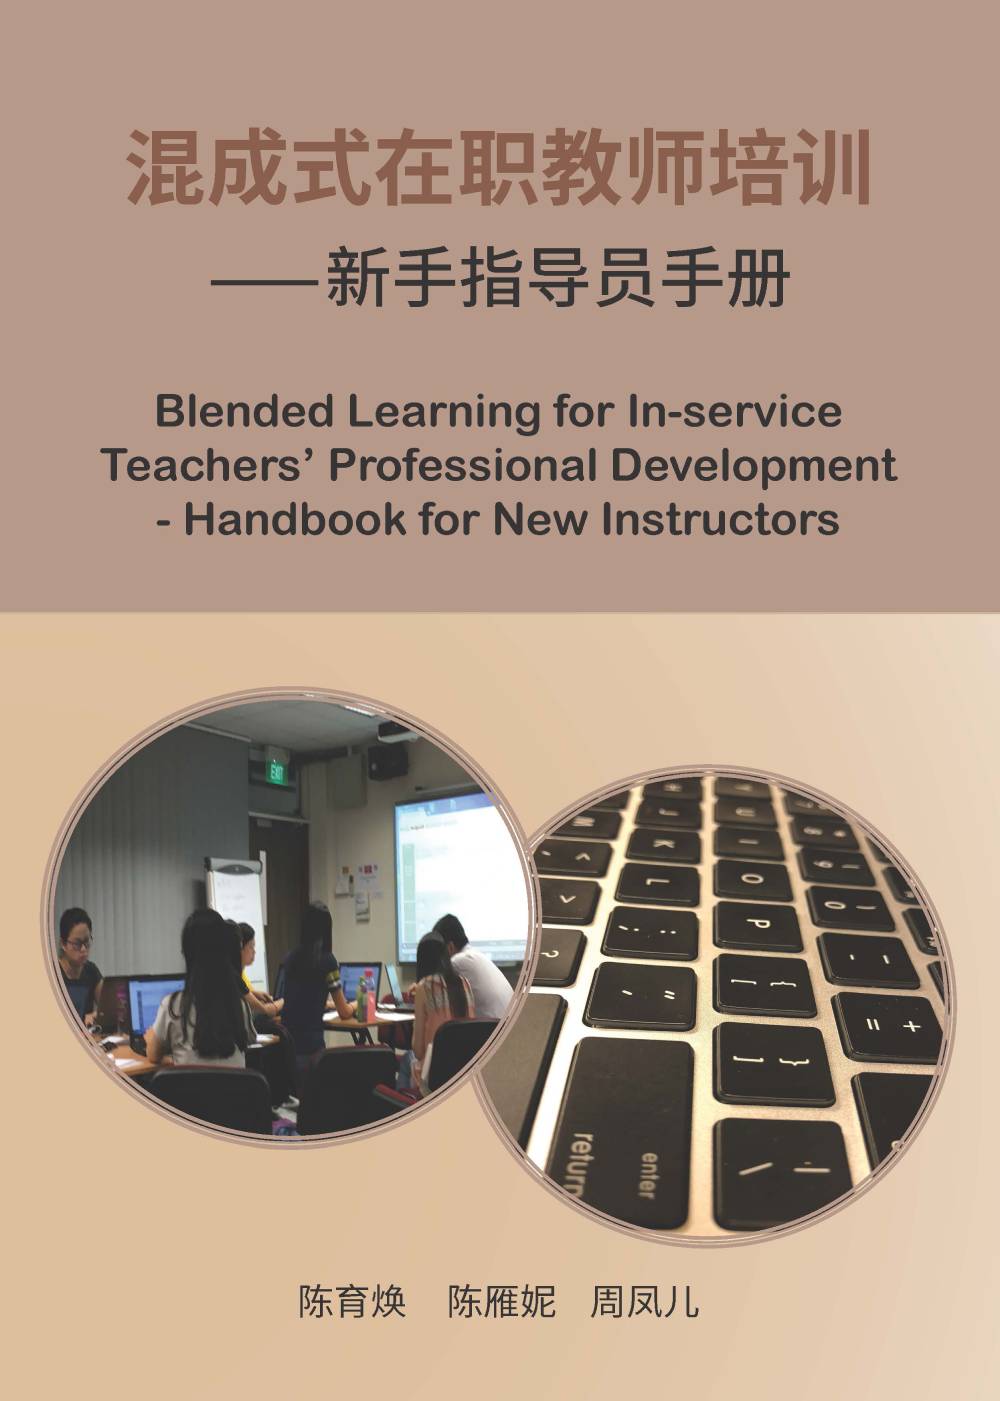 Blended Learning for In-service Teachers’ Professional Development – Handbook for New Instructors